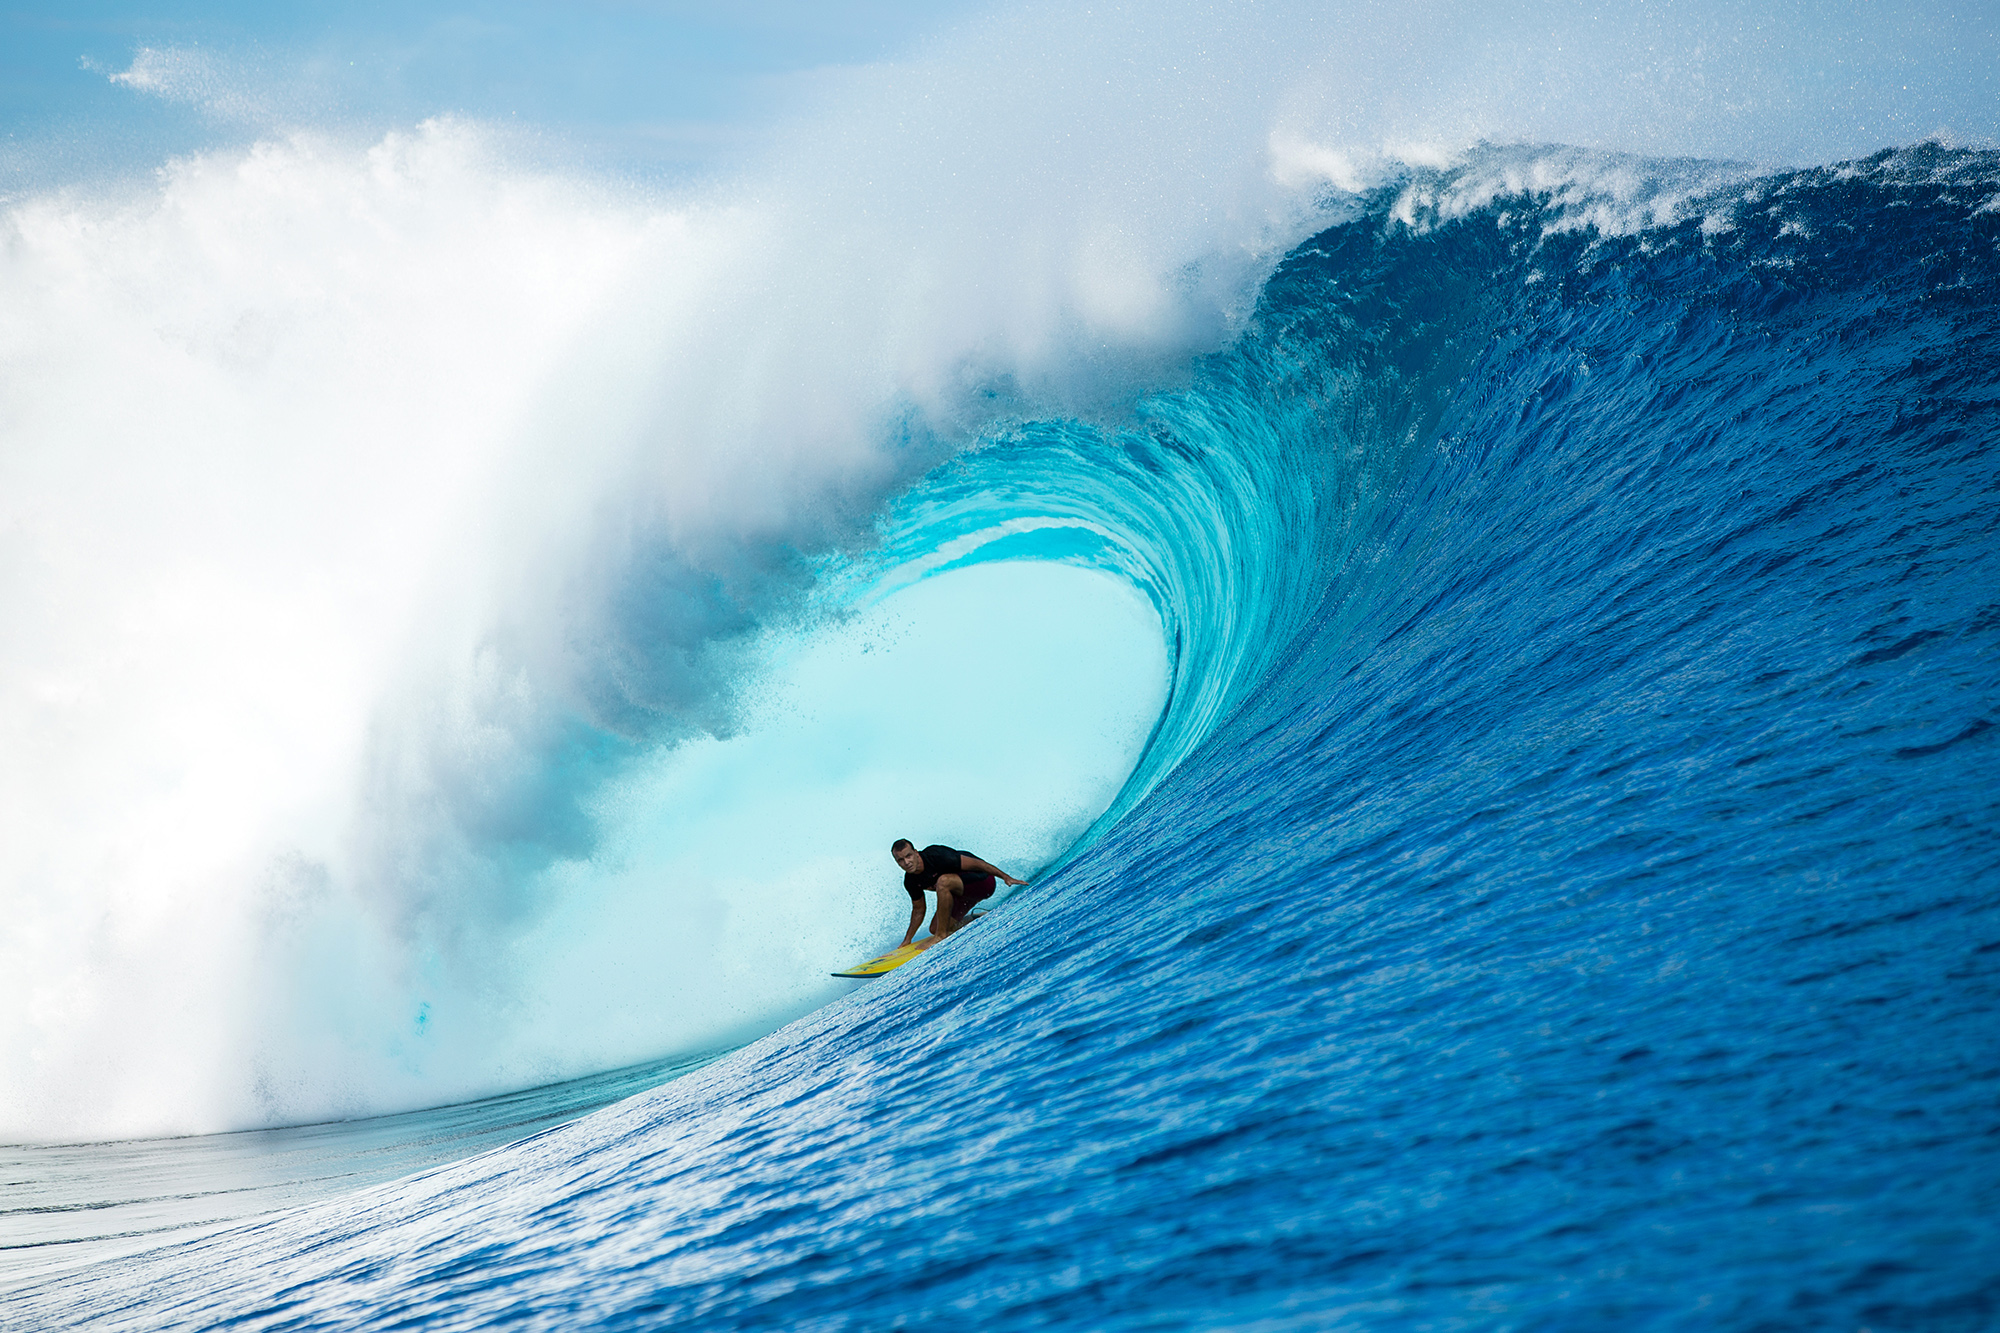 On This Day: The Volcom Fiji Pro Swell at Cloudbreak, The Rearview Mirror